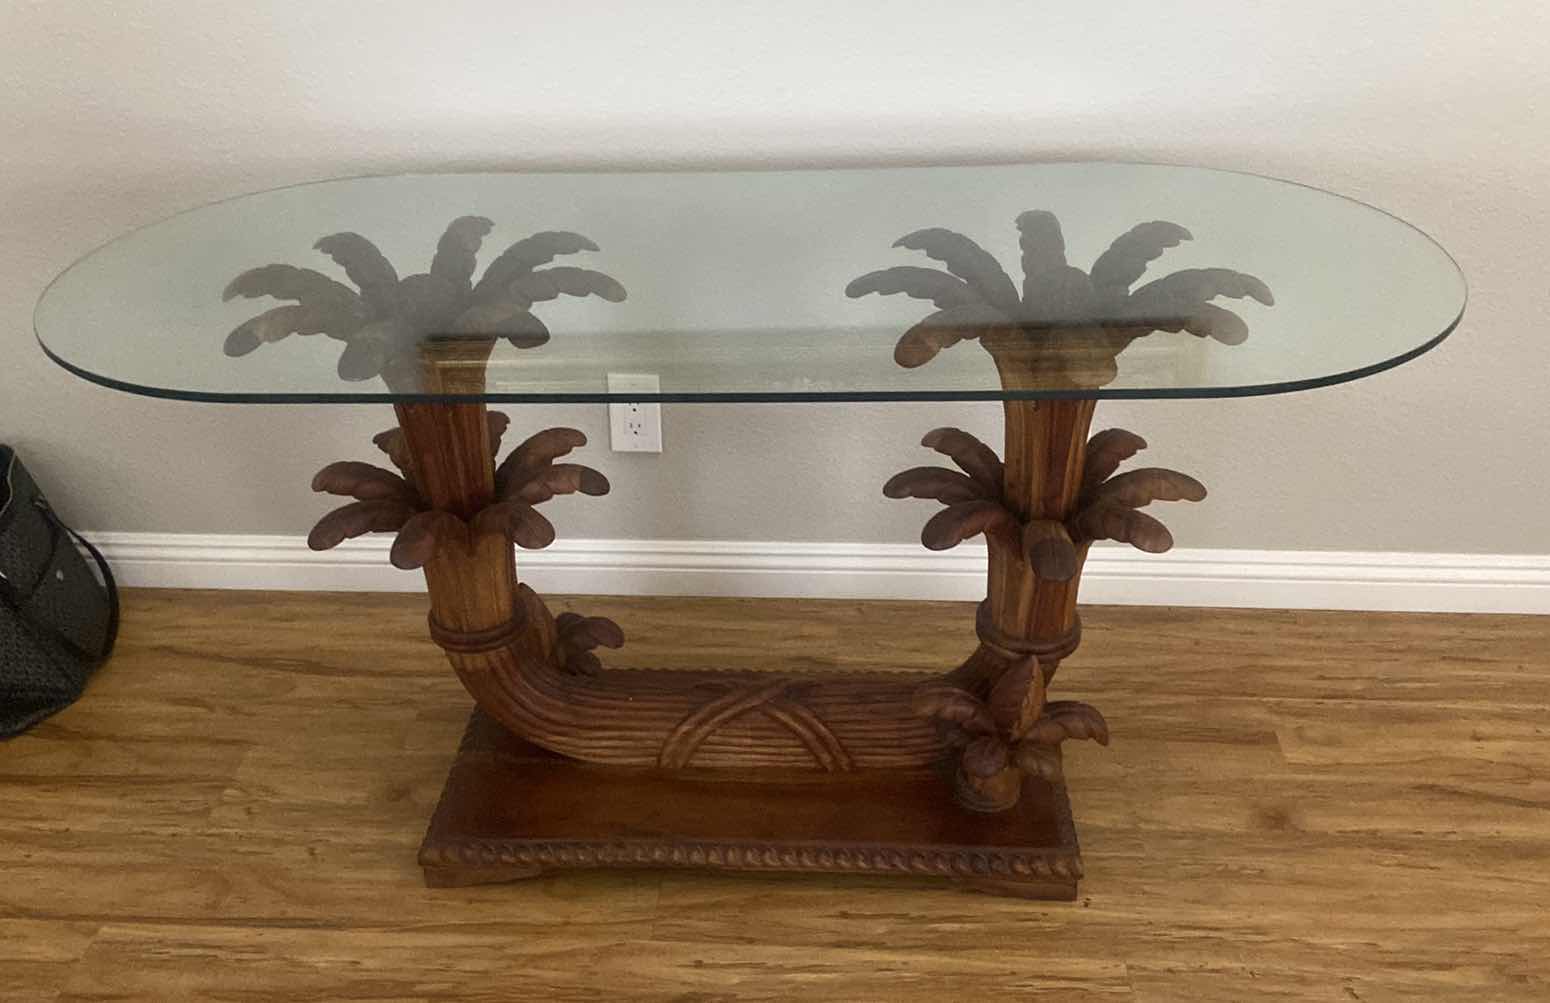 Photo 1 of CUSTOM MADE CONSOLE TABLE CARVED WOOD AND GLASS TOP FROM BALI INDONESIA 59” x 26” x 29”